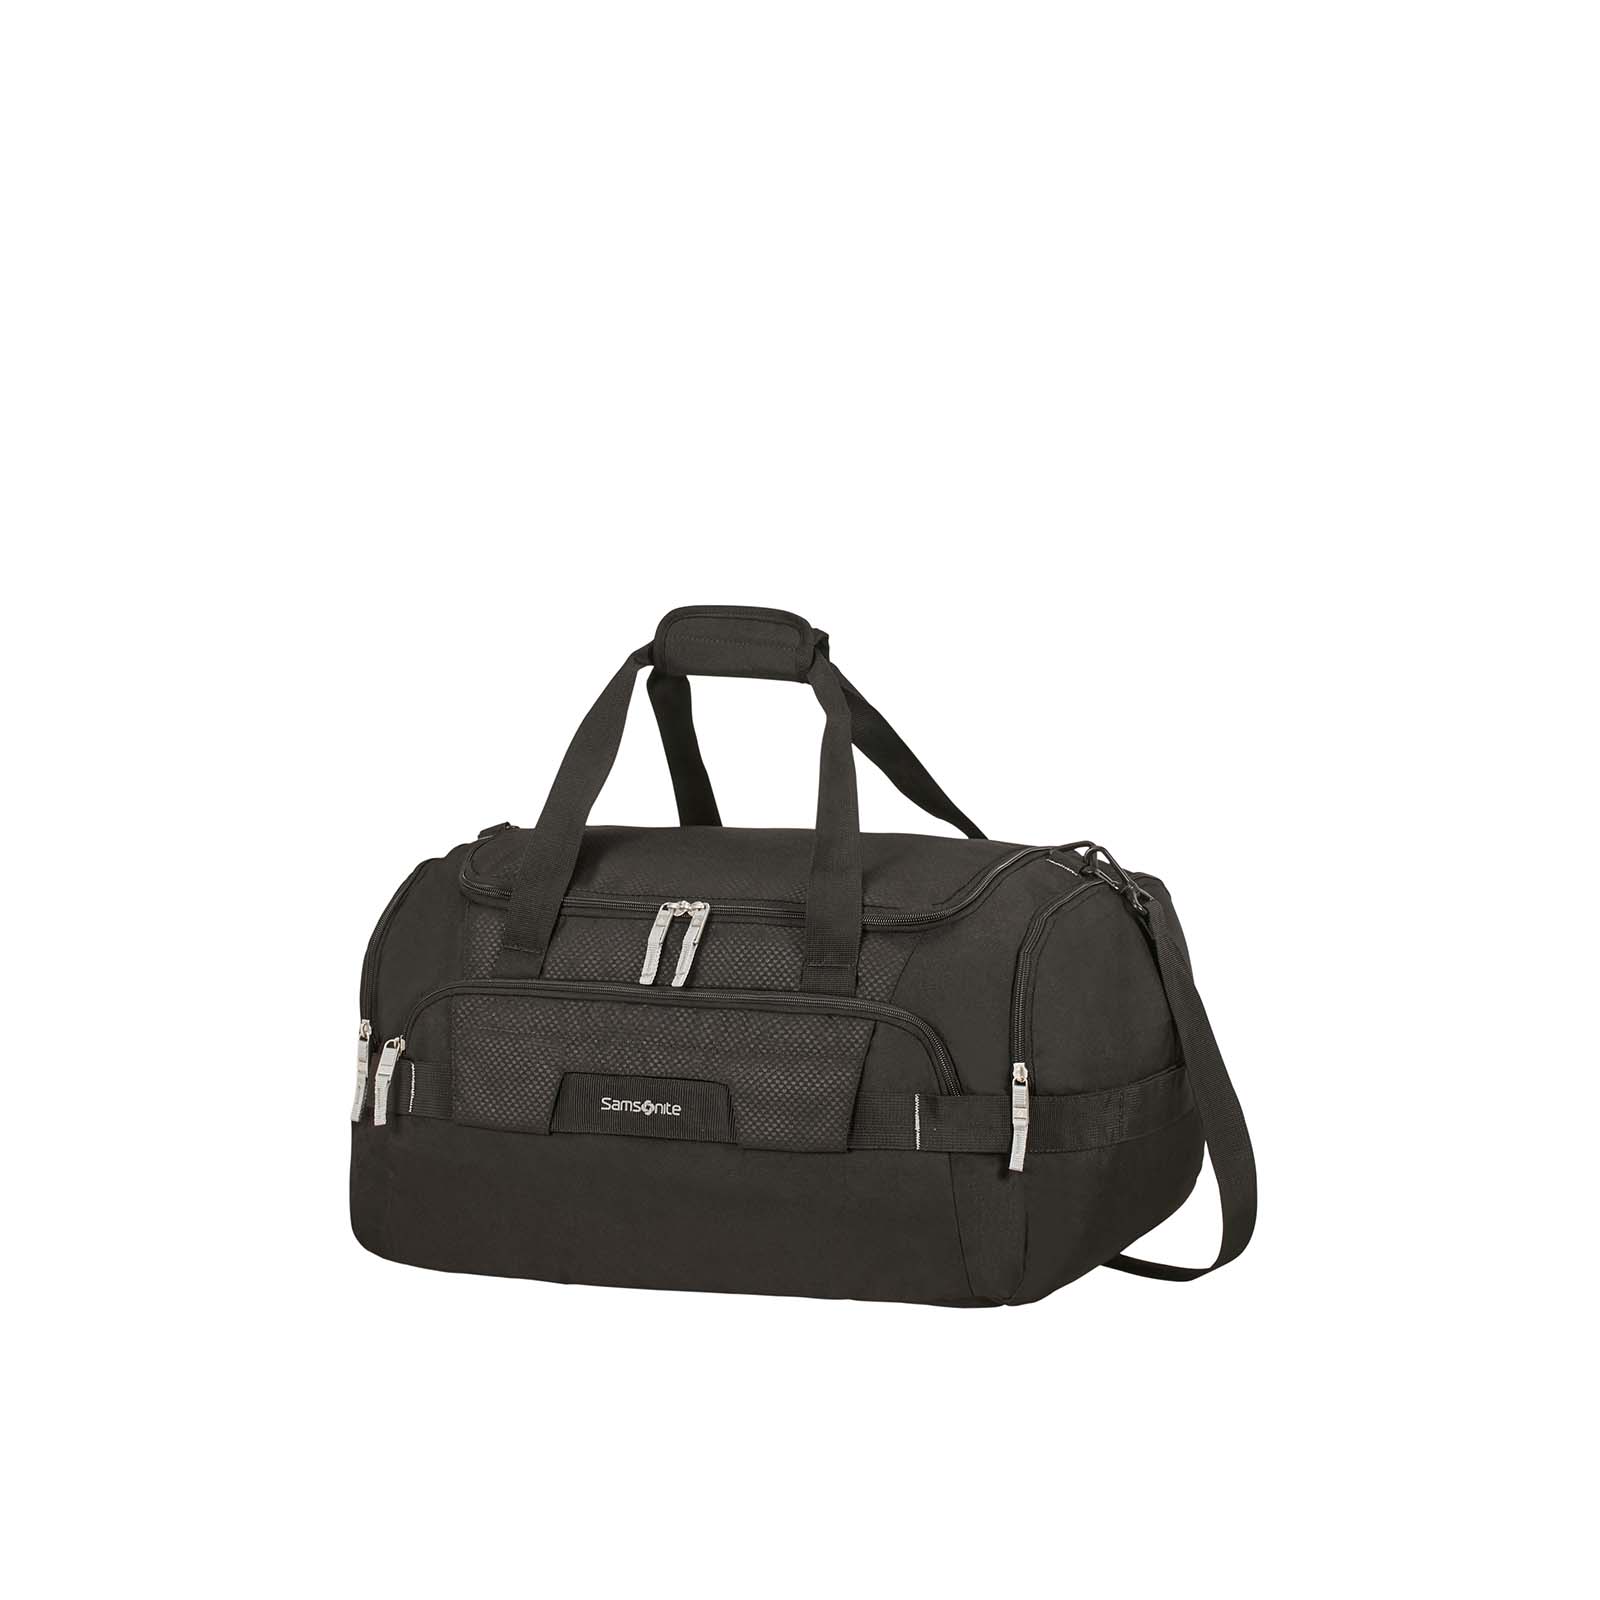 Samsonite-Sonora-55cm-Carry-On-Duffel-Black-Front-Angle